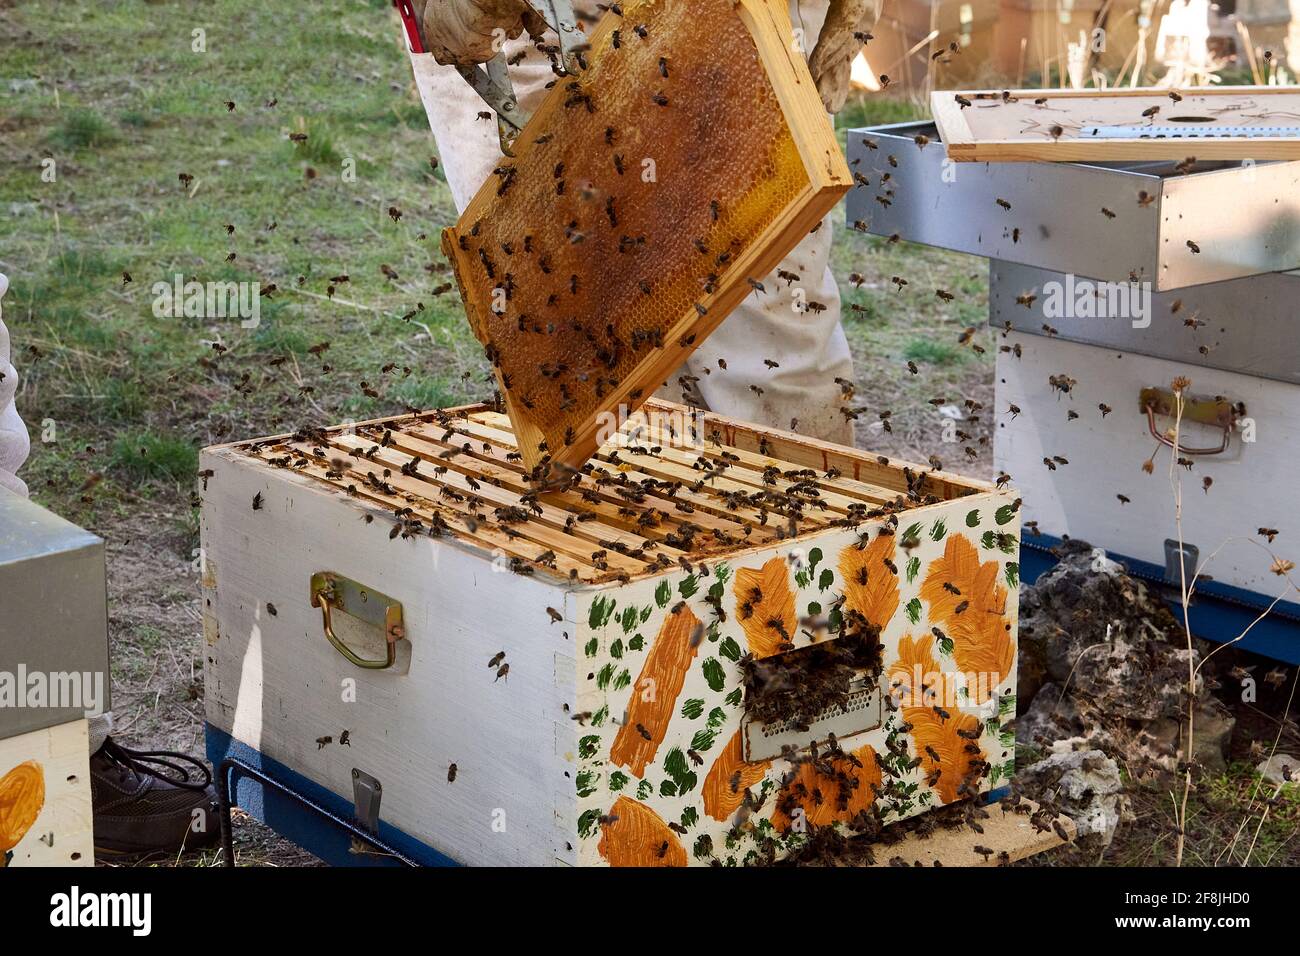 Apiarist working with your bees to achieve sweet honey Stock Photo